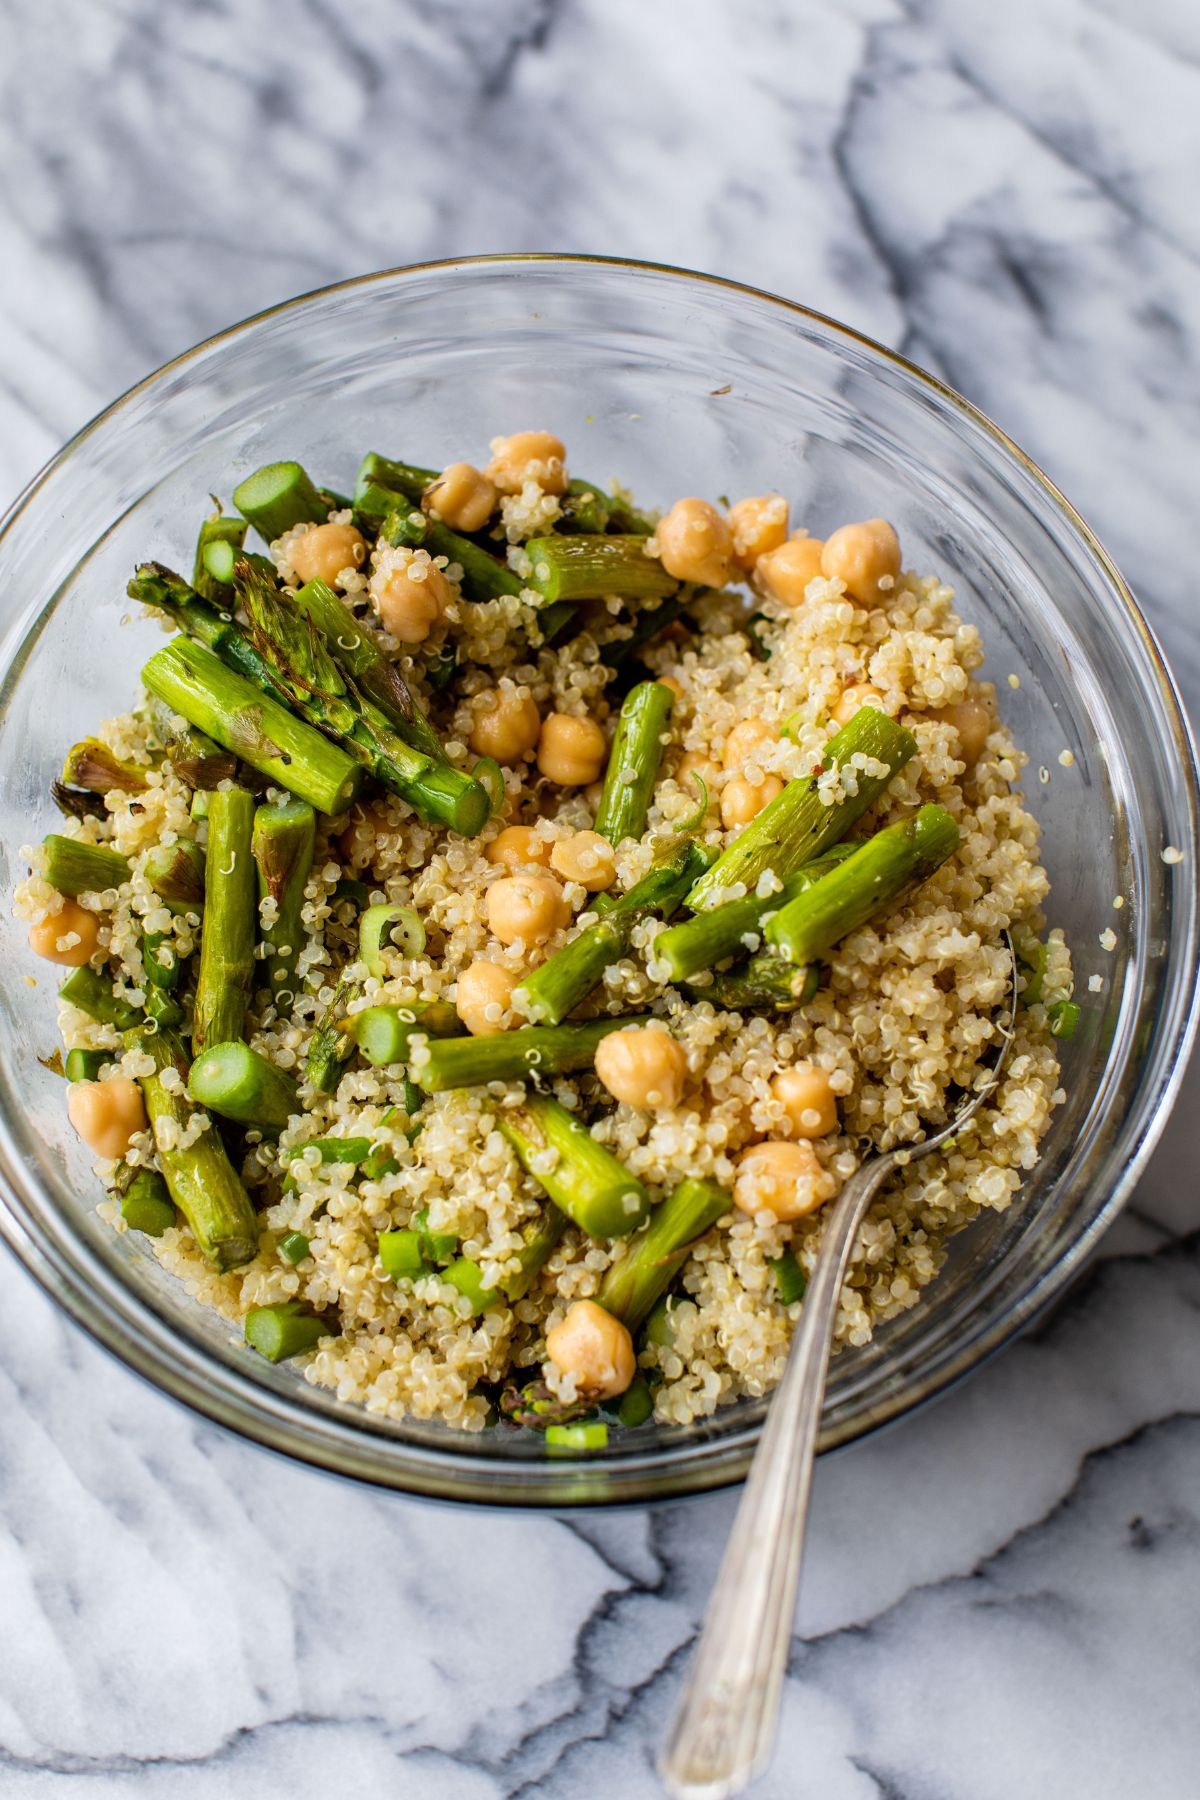 Mixing quinoa with roasted asparagus and chickpeas.